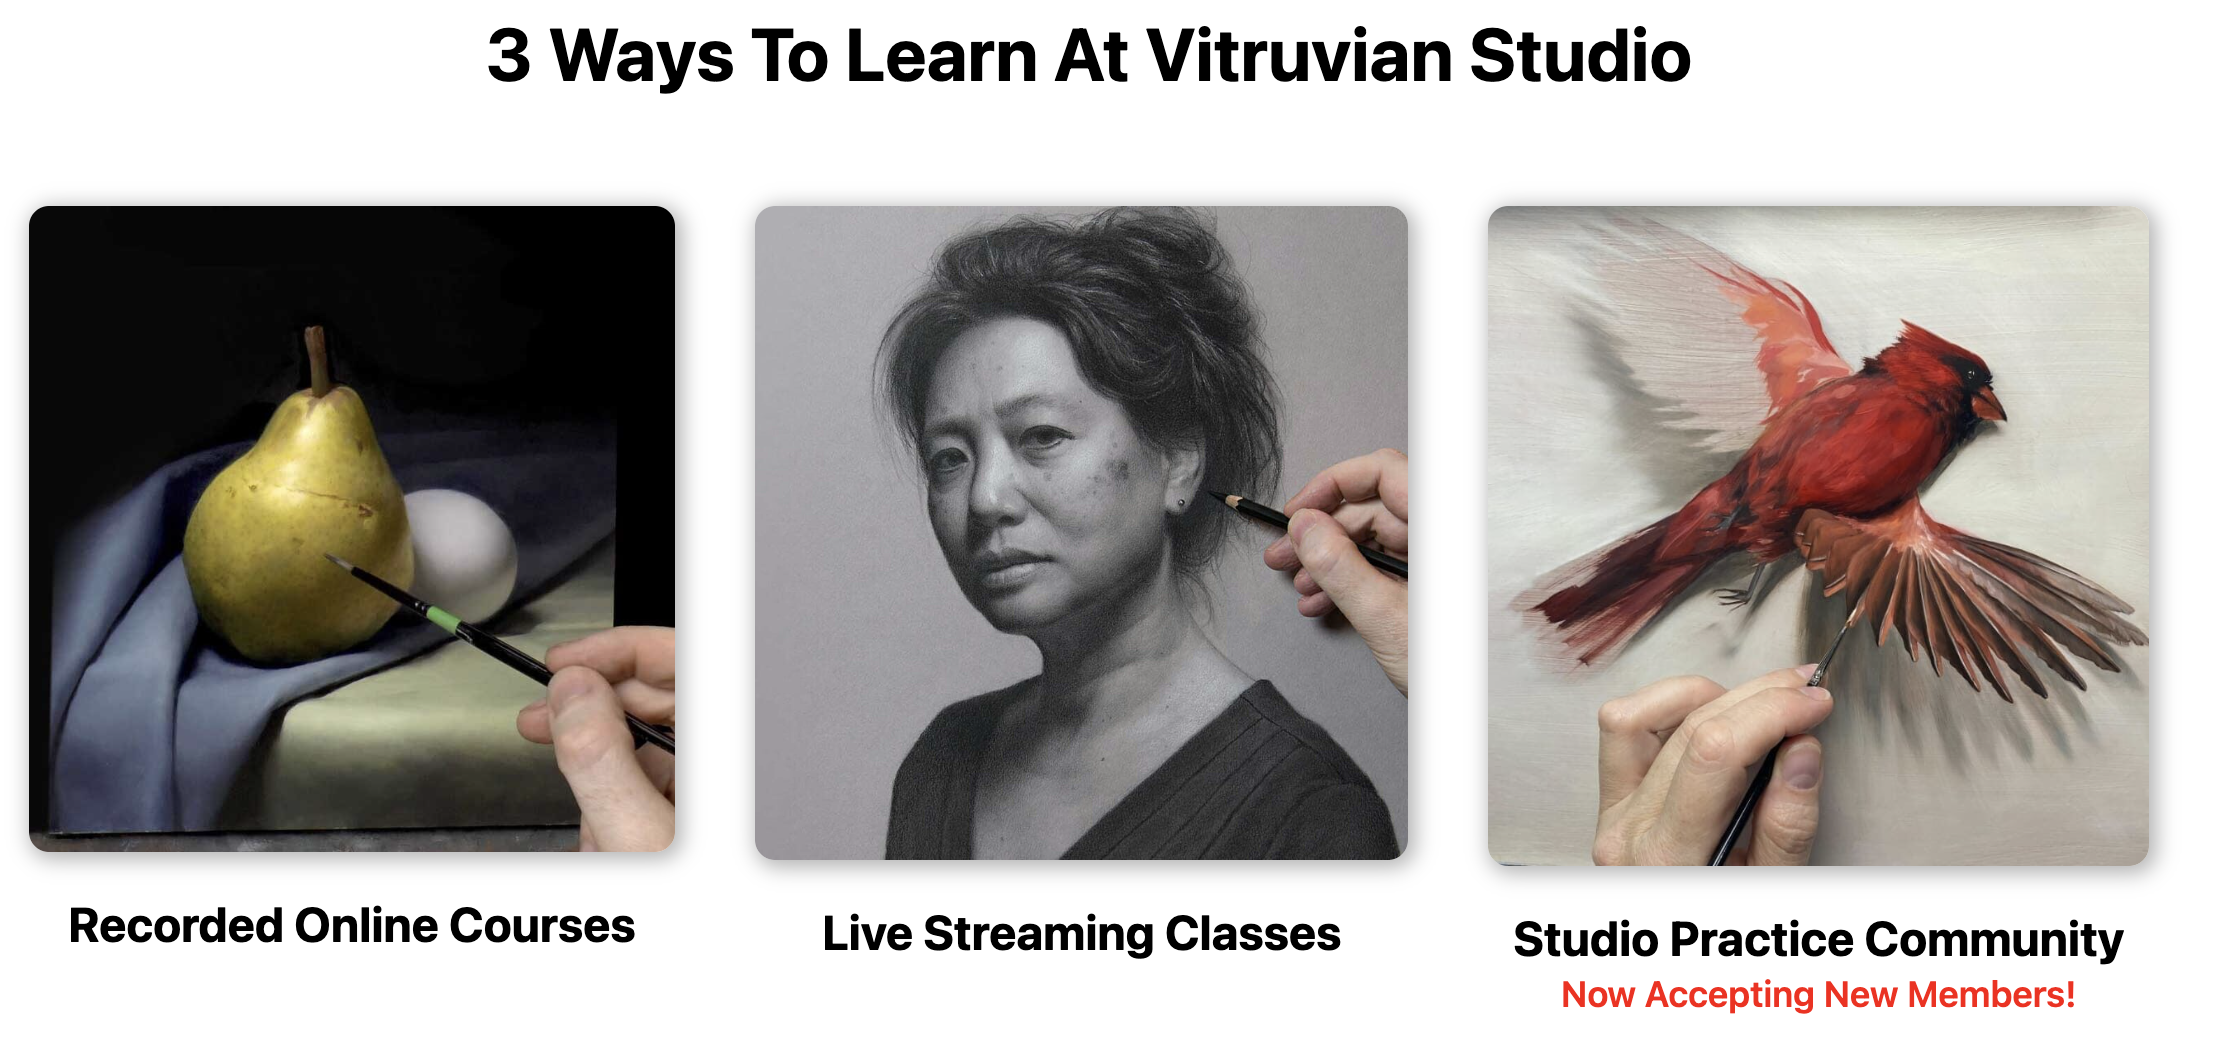 The Studio Practice Community is an add-on to how students can learn at Vitruvian Studio.
